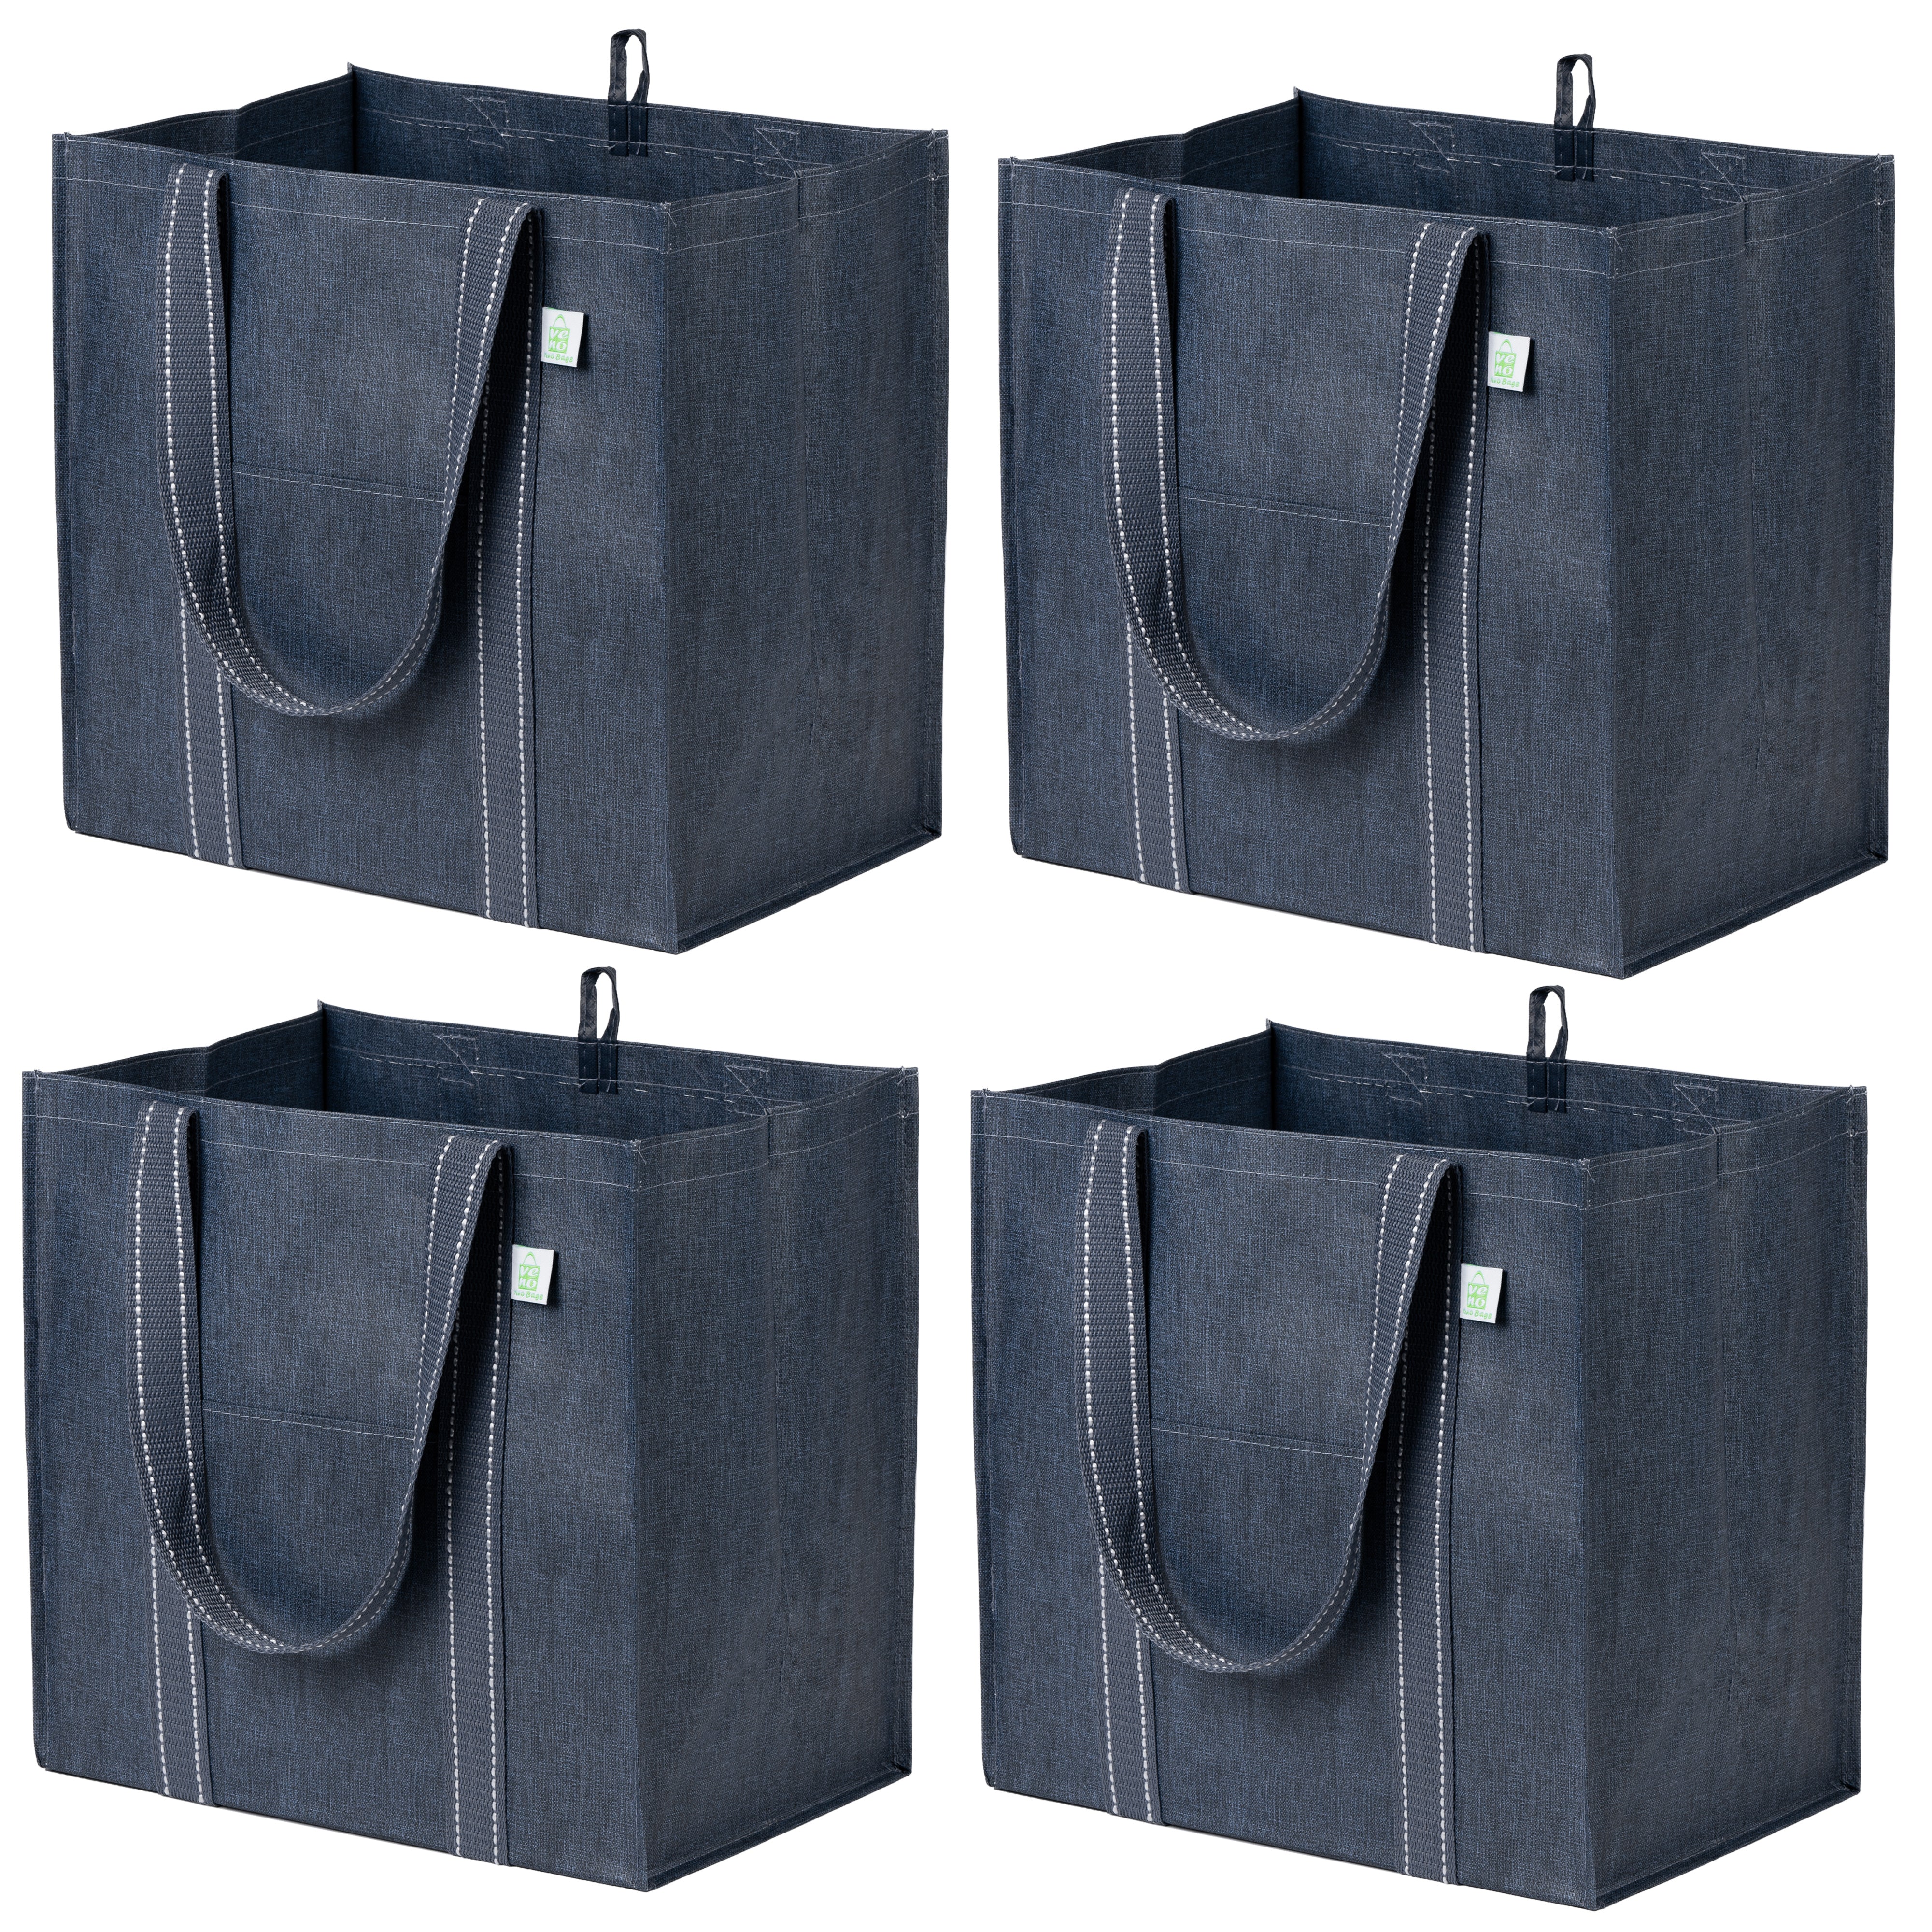 4 Pack Reusable Grocery Shopping Bag with Reinforced Hard Bottom, Beige